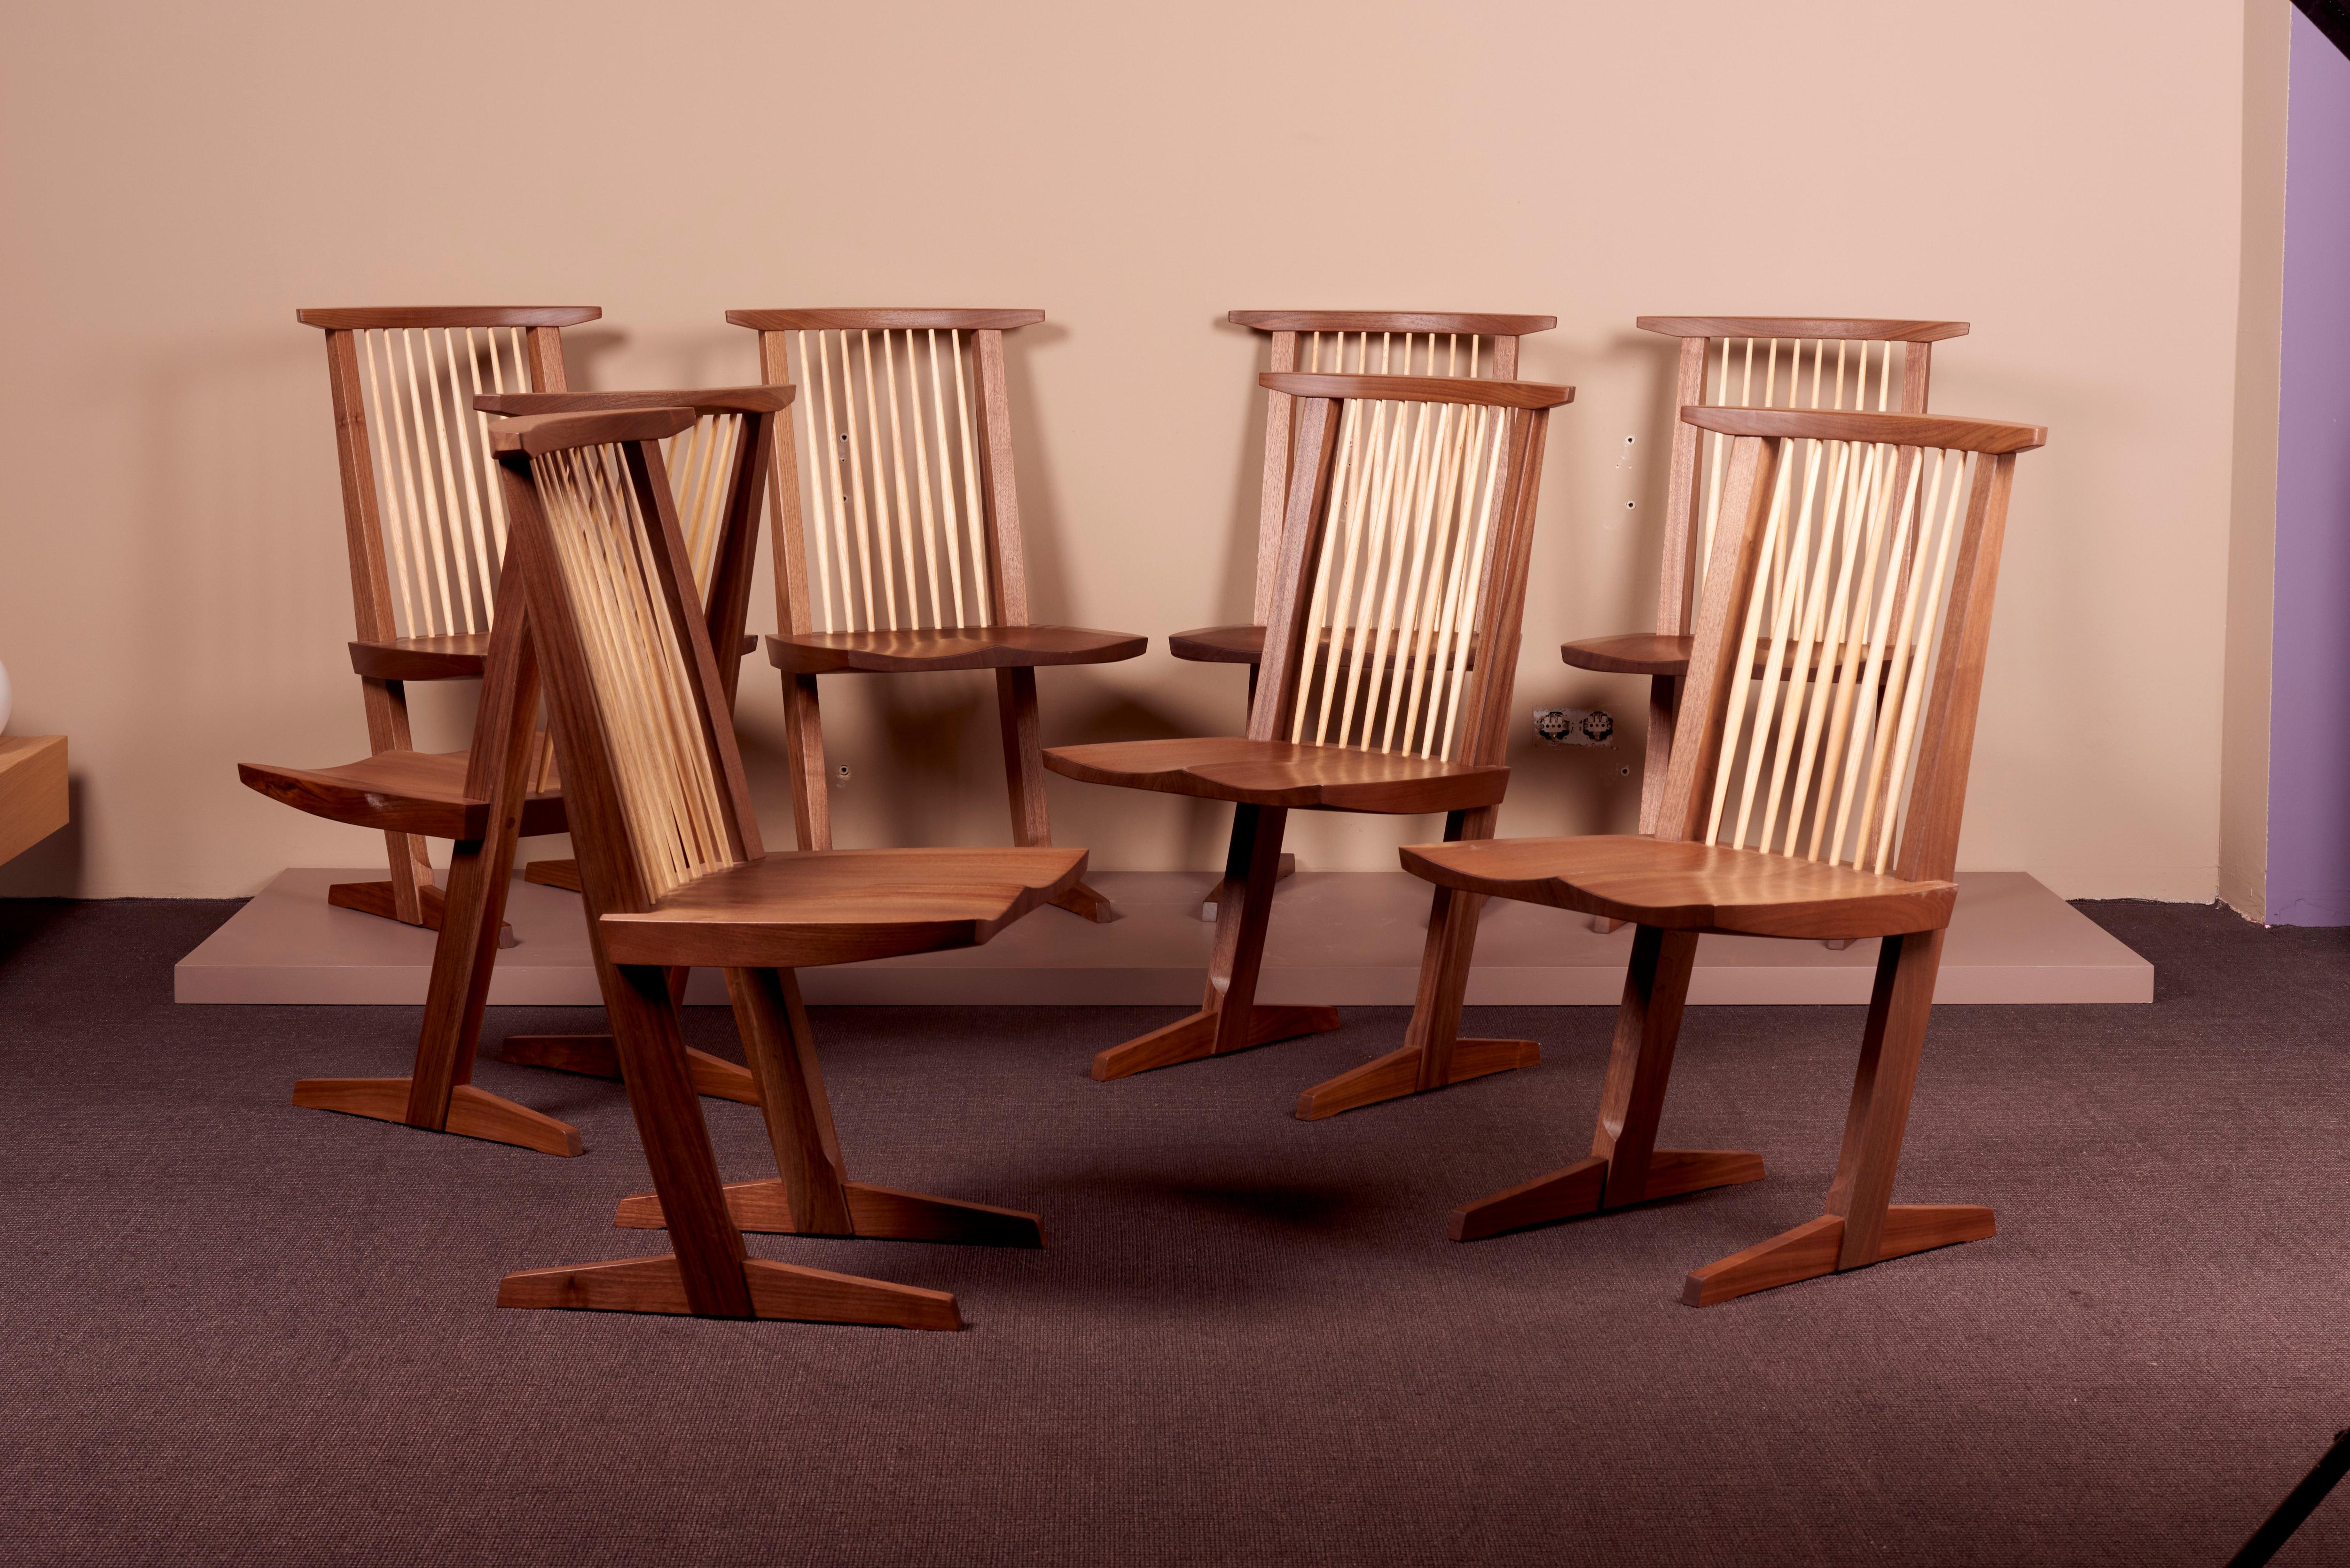 Set of 8 Conoid Dining chairs by Mira Nakashima based on a design by George Nakashima. All chairs can be signed (just an example on the photo). Important: Please consider the production lead time of about 18 months. 
    